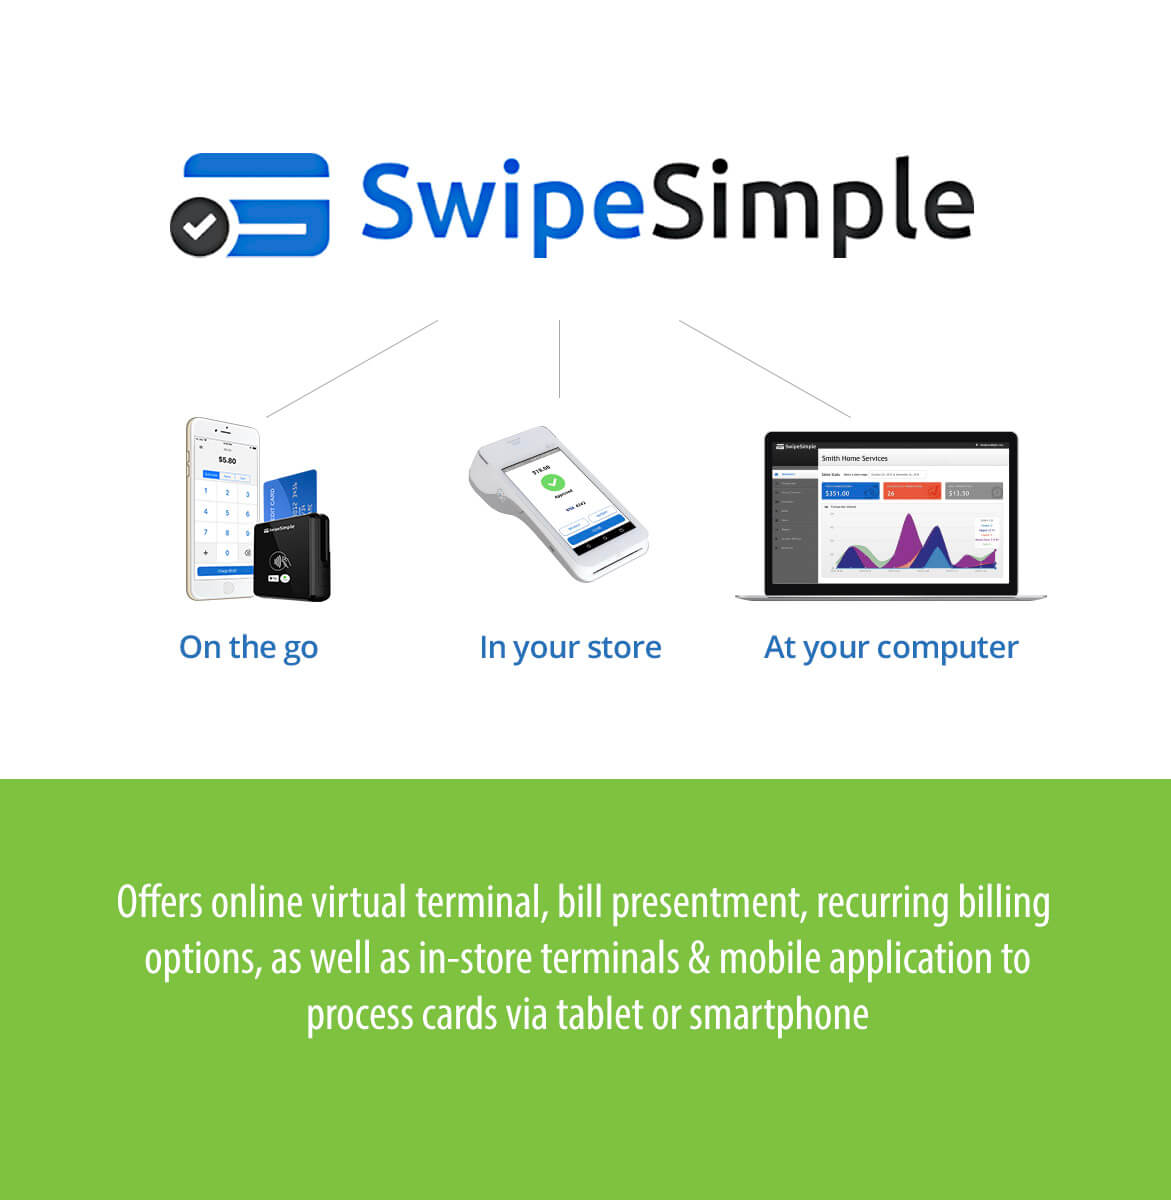 SwipeSimple offers online virtual terminal, bill presentment, recurring billing options, as well as in-store terminals & mobile application to process cards via tablet or smartphone